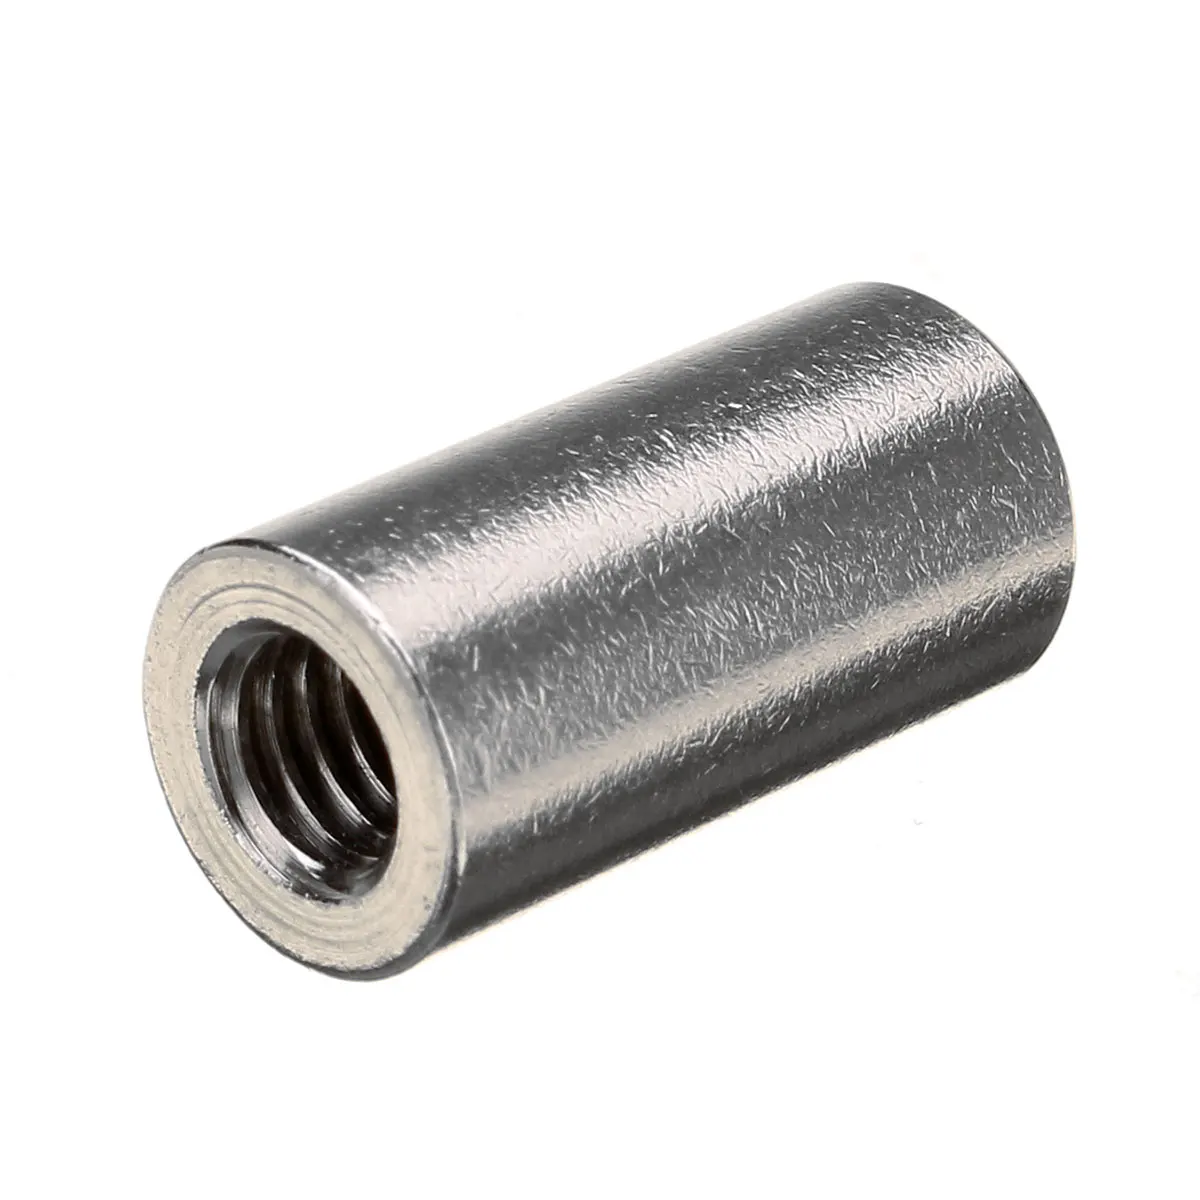 A2 STAINLESS STEEL ROUND STUDDING CONNECTOR NUTS THREADED ROD BAR COUPLERS 